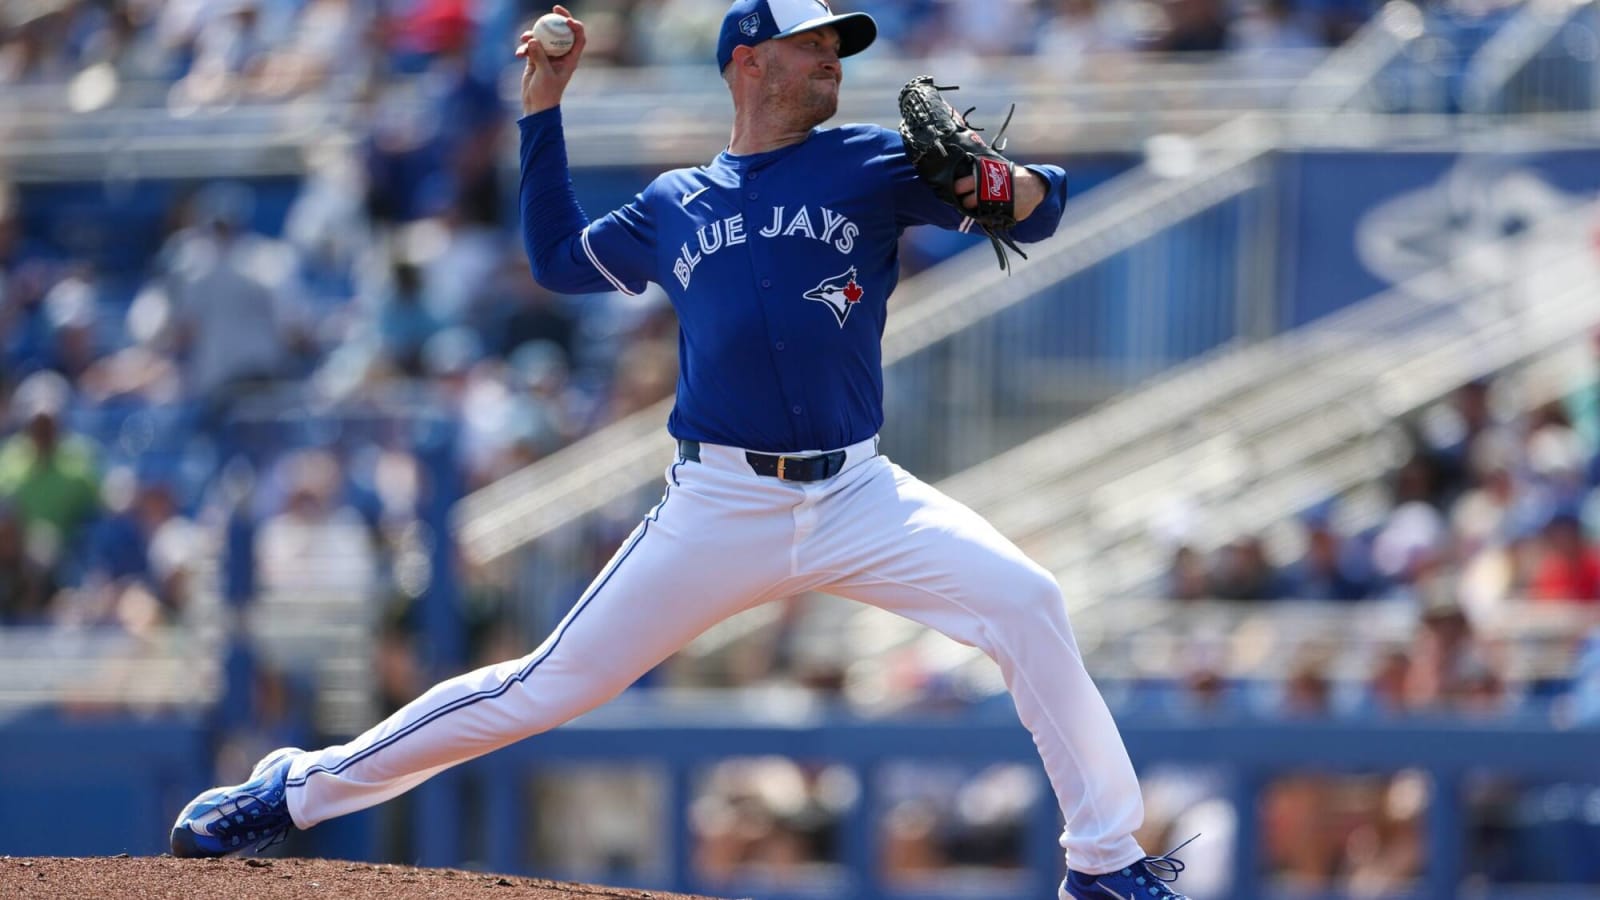 Trevor Richards continues to put up strong numbers in the Blue Jays bullpen